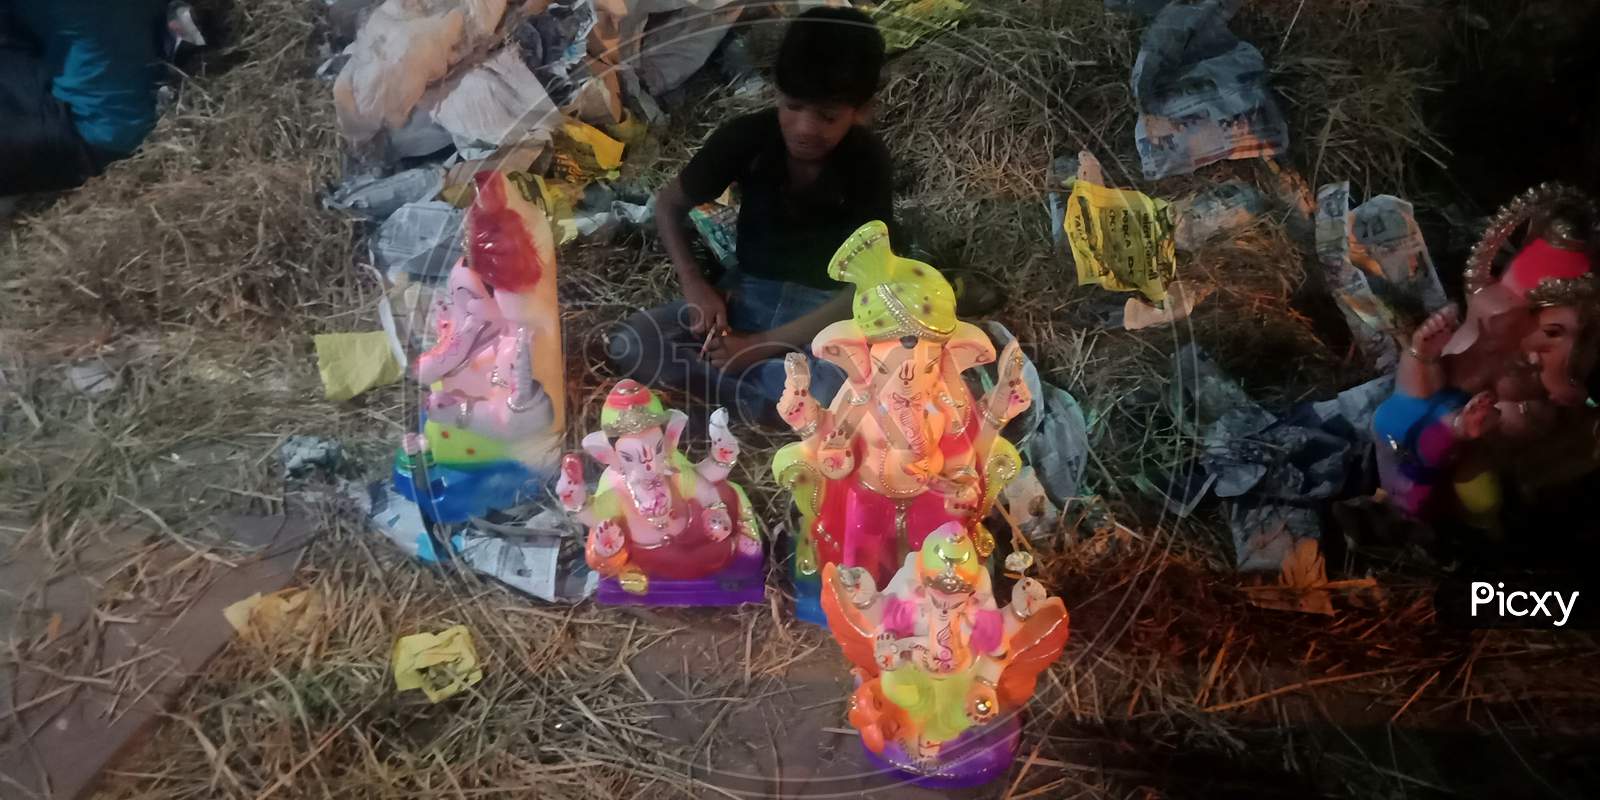 Lord Ganesha Statue With Colorful Painting Art.